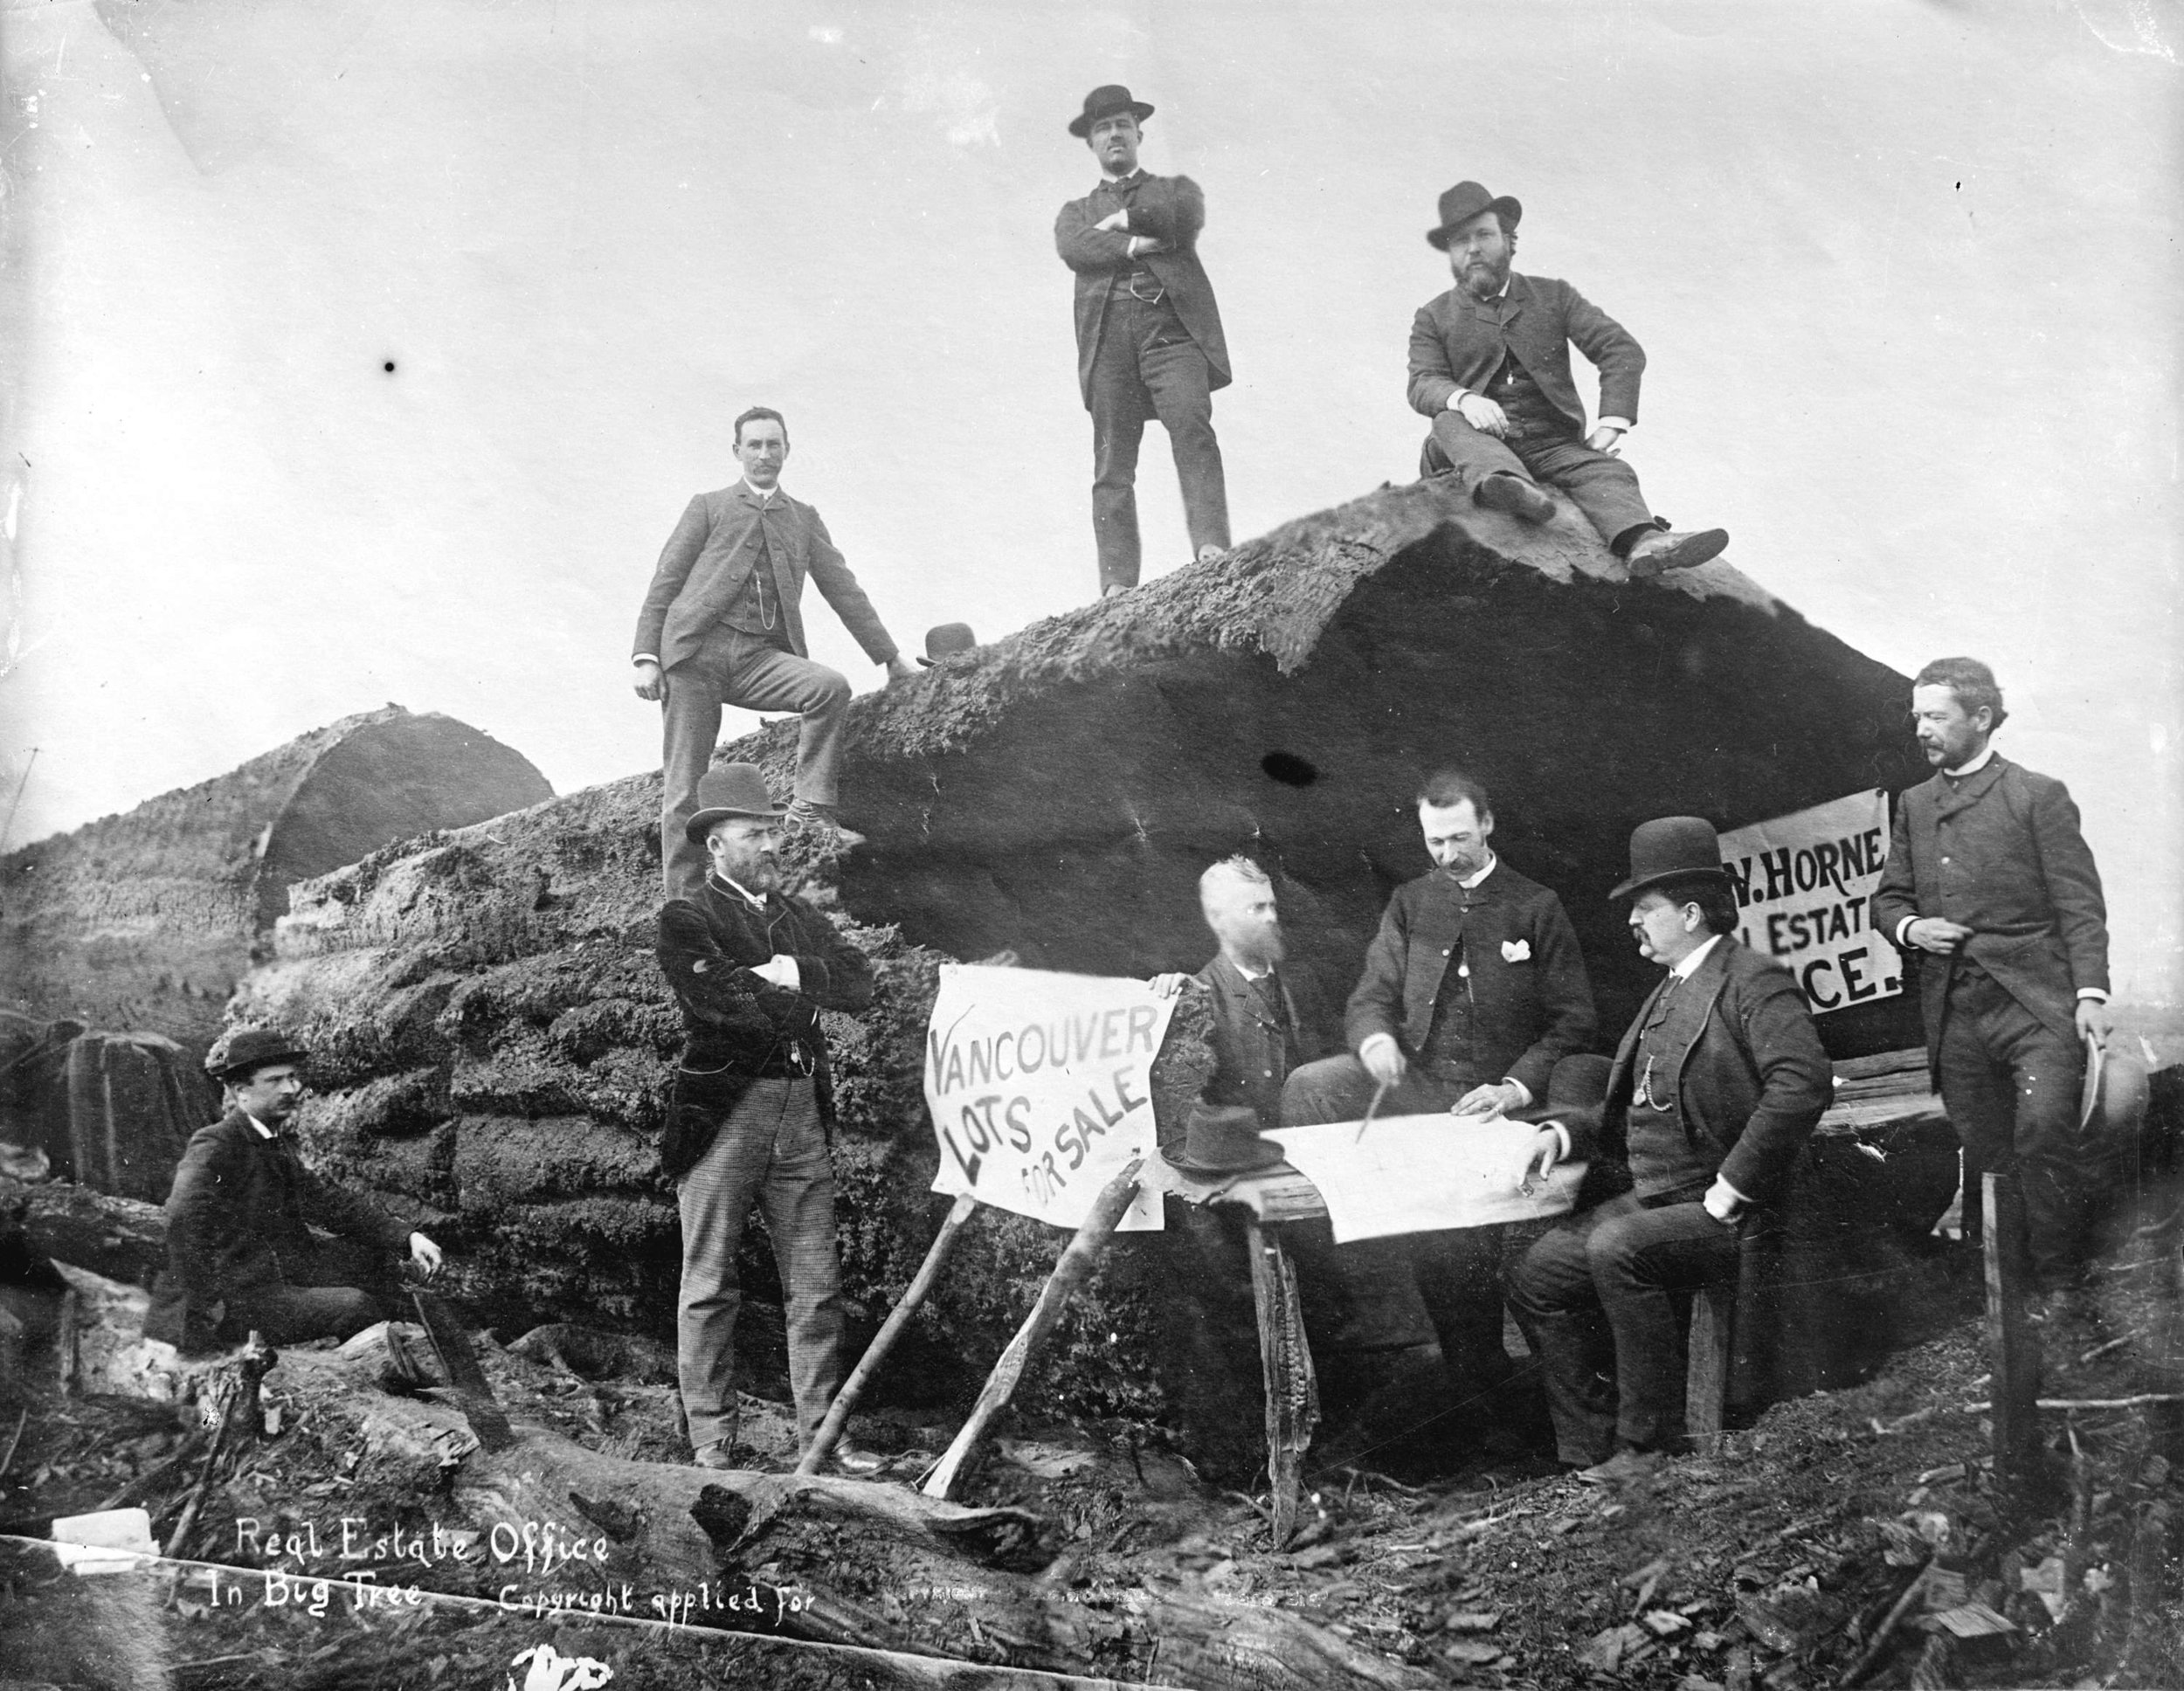 Real-Estate-Office-in-a-big-tree-promotional-event-in-Vancouver-in-1886-Vancouver-Archives.jpg